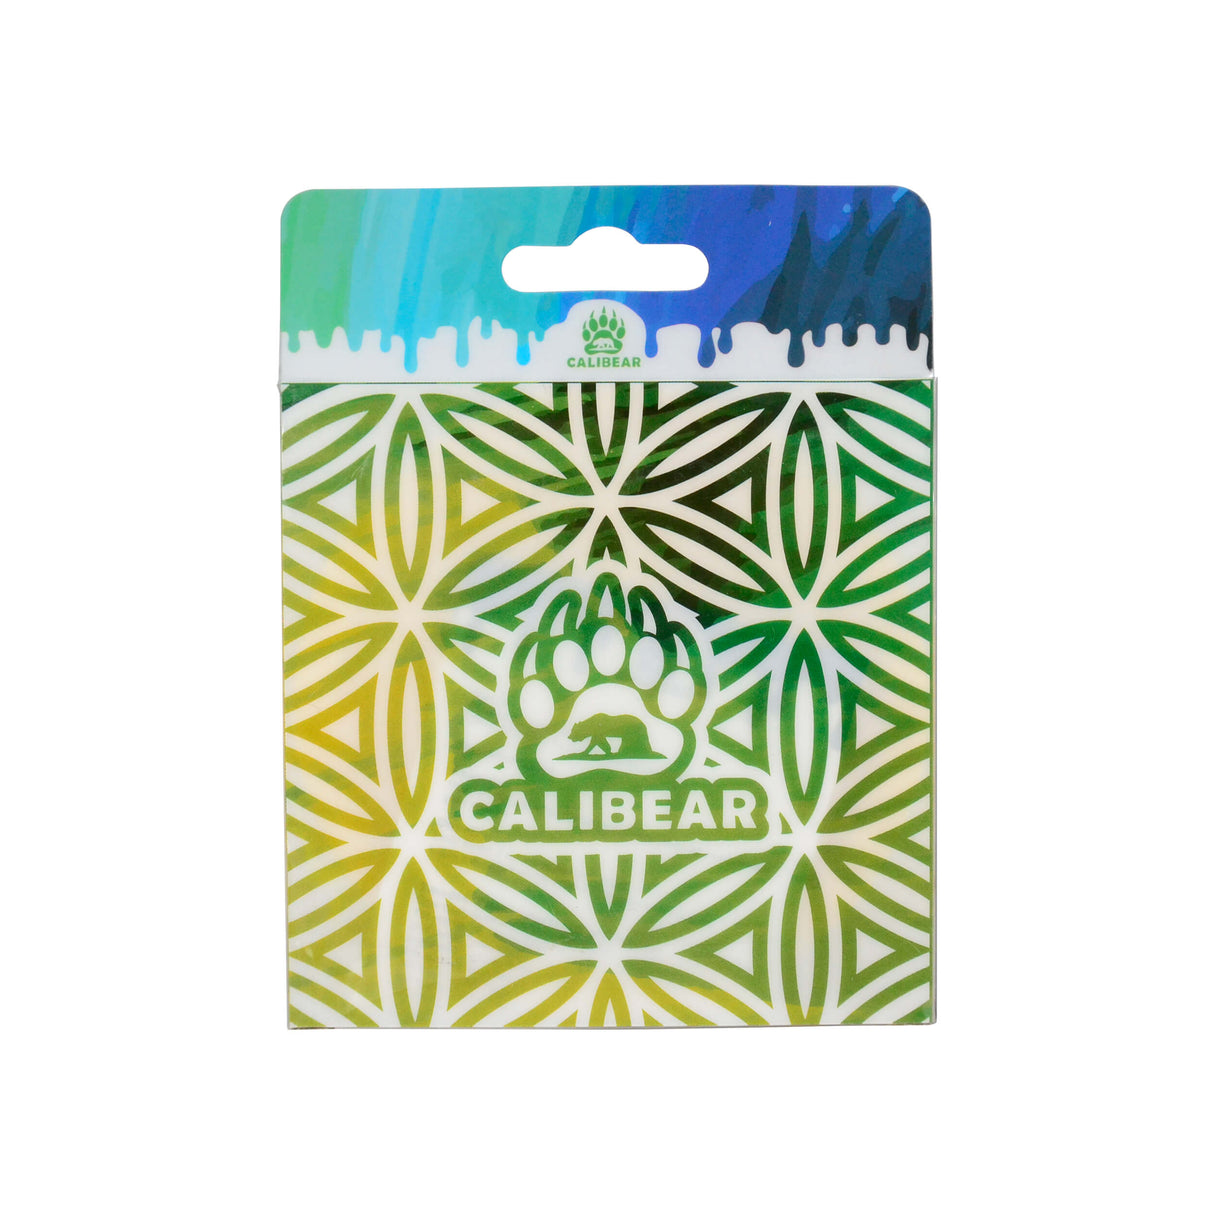 Calibear LED Silicone Base packaging with vibrant geometric design, front view